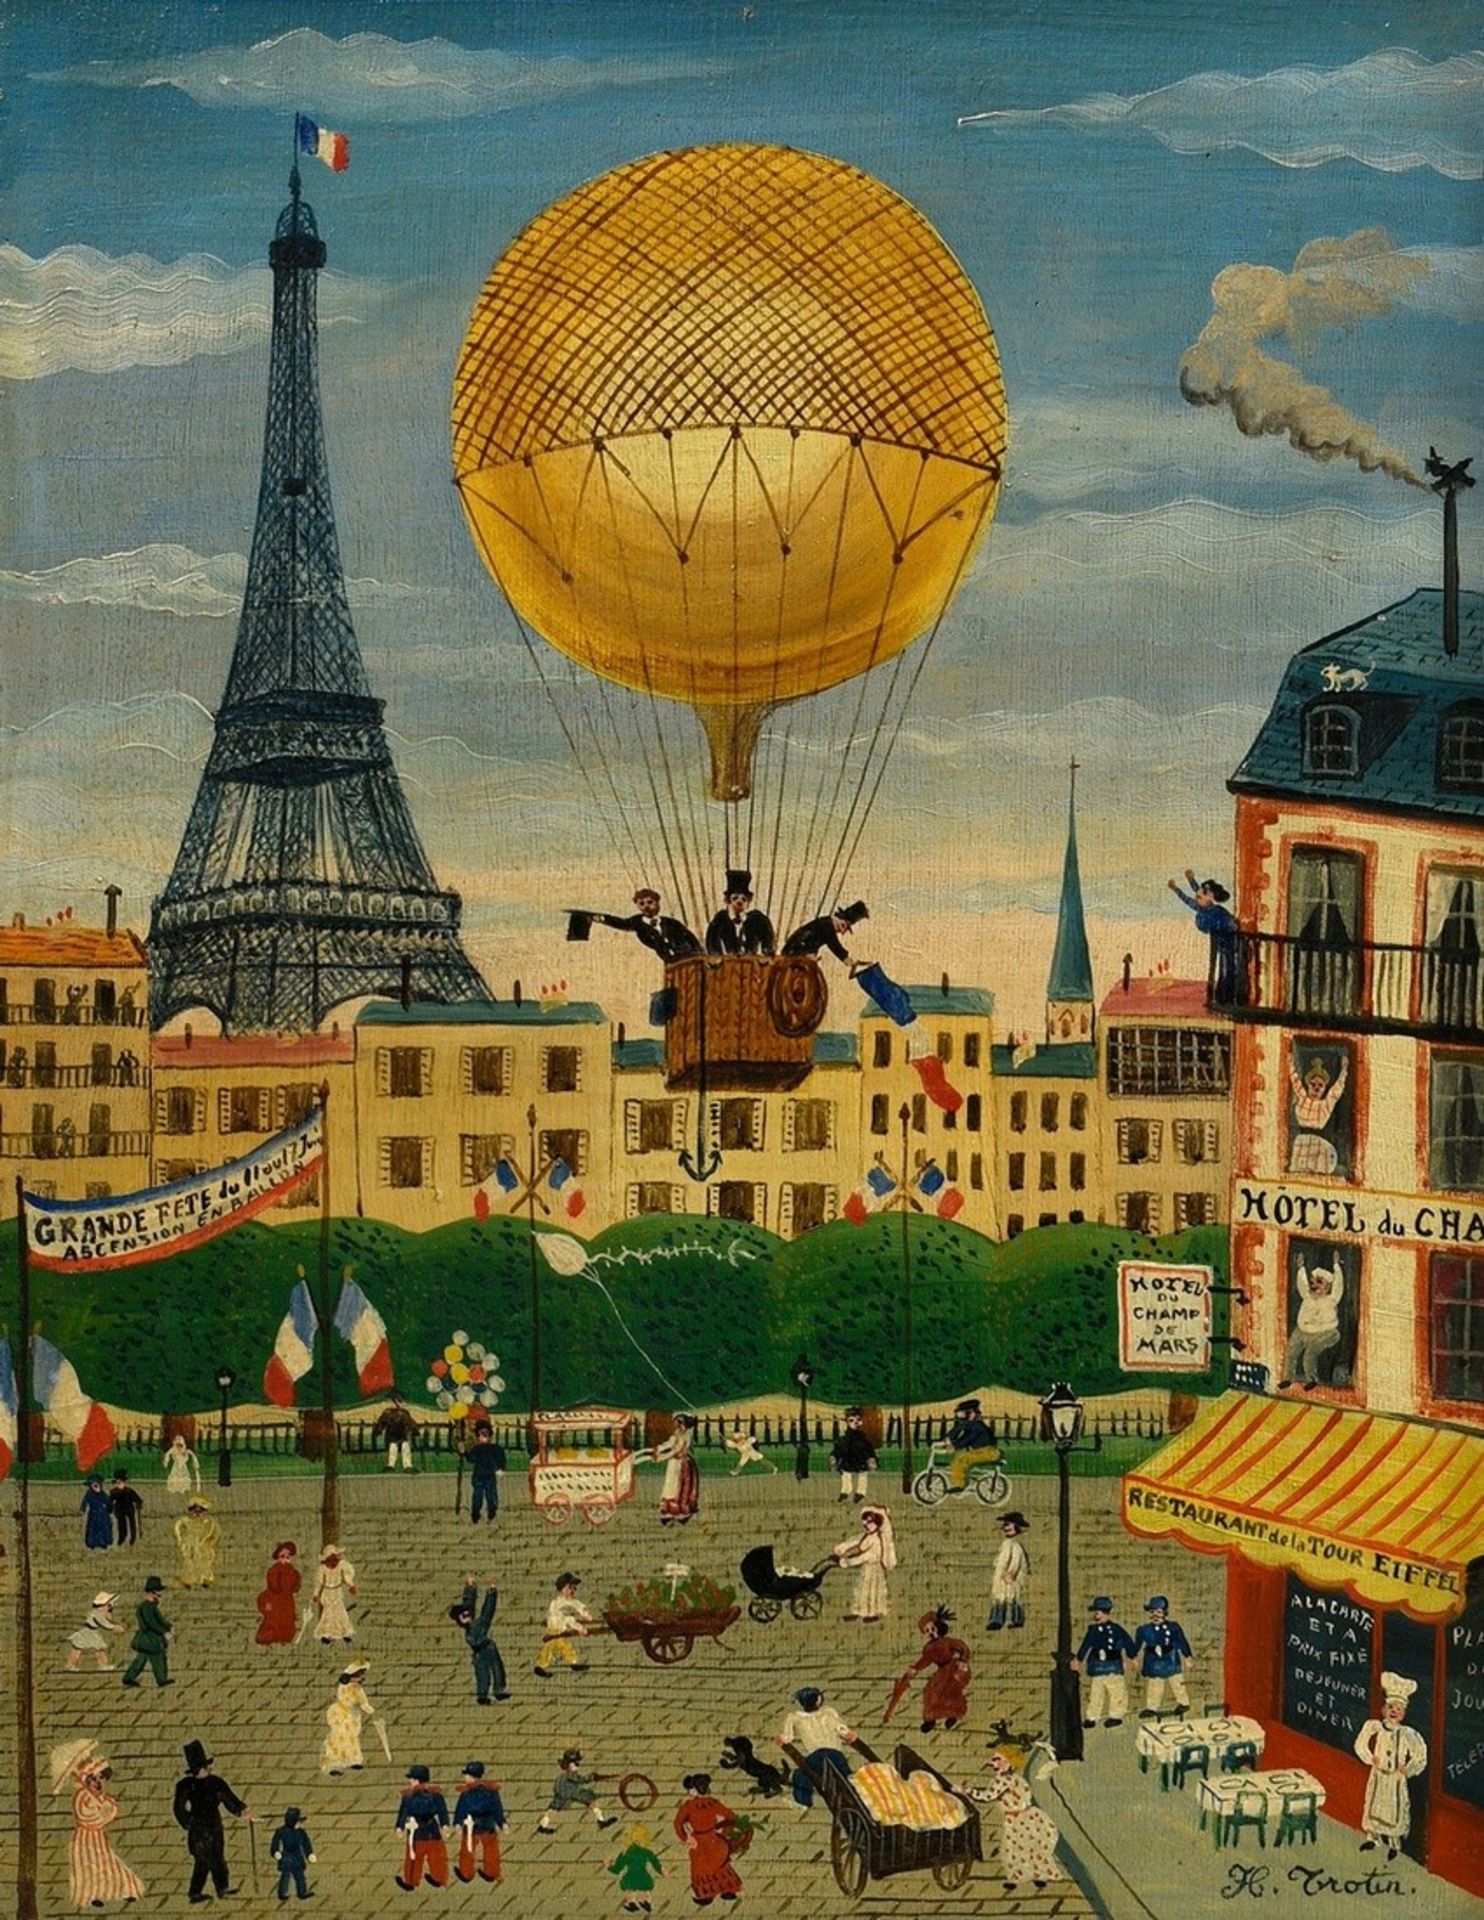 Trotin, Hector (1894-1966) "Balloon over Paris", oil/wood, b.r. sign., verso adhesive label "Kunsth